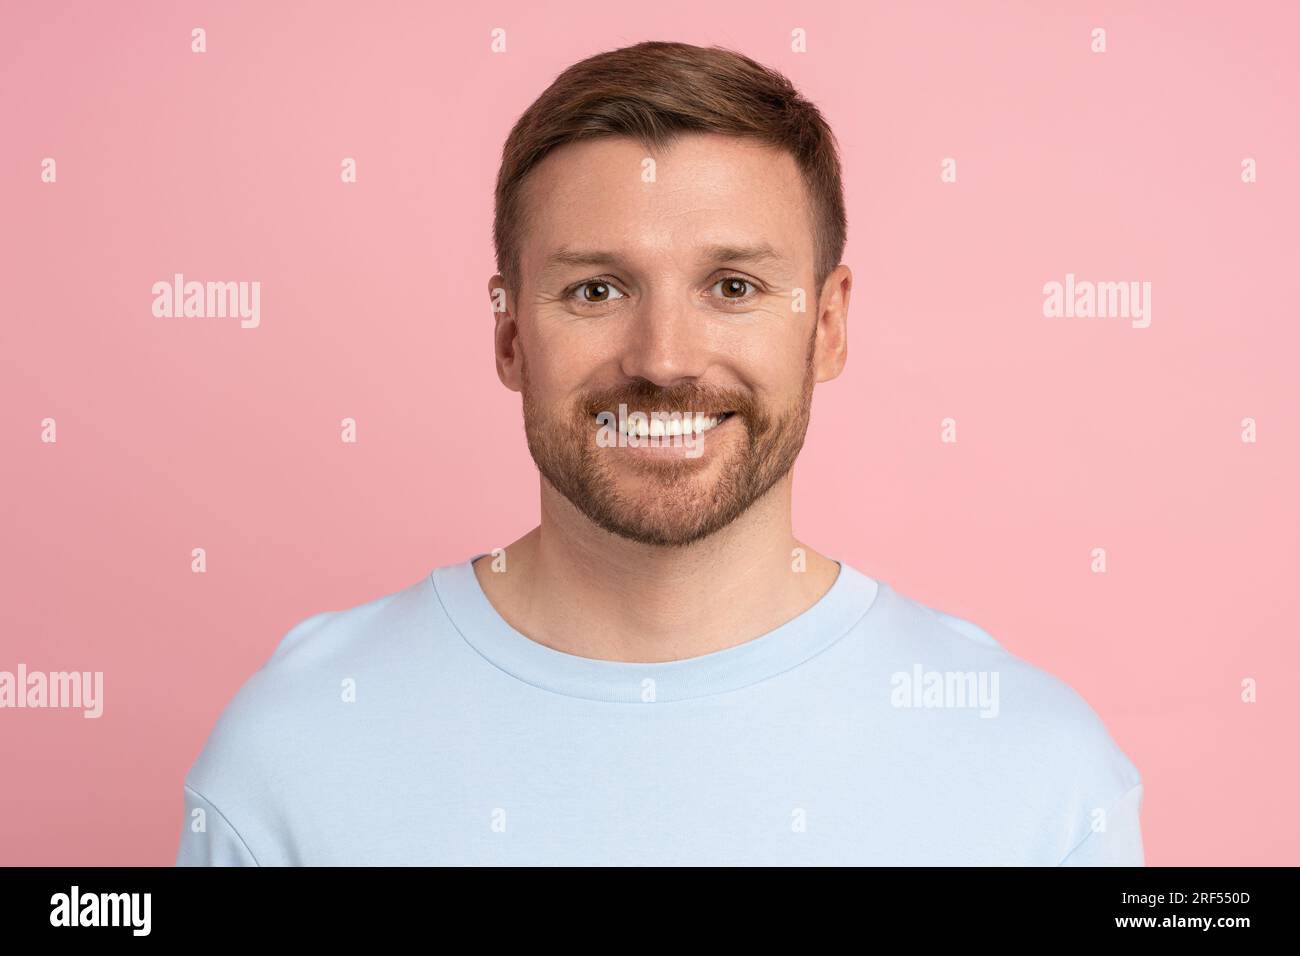 Portrait of caucasian bearded handsome man looking at camera smiling on pink studio background. Stock Photo